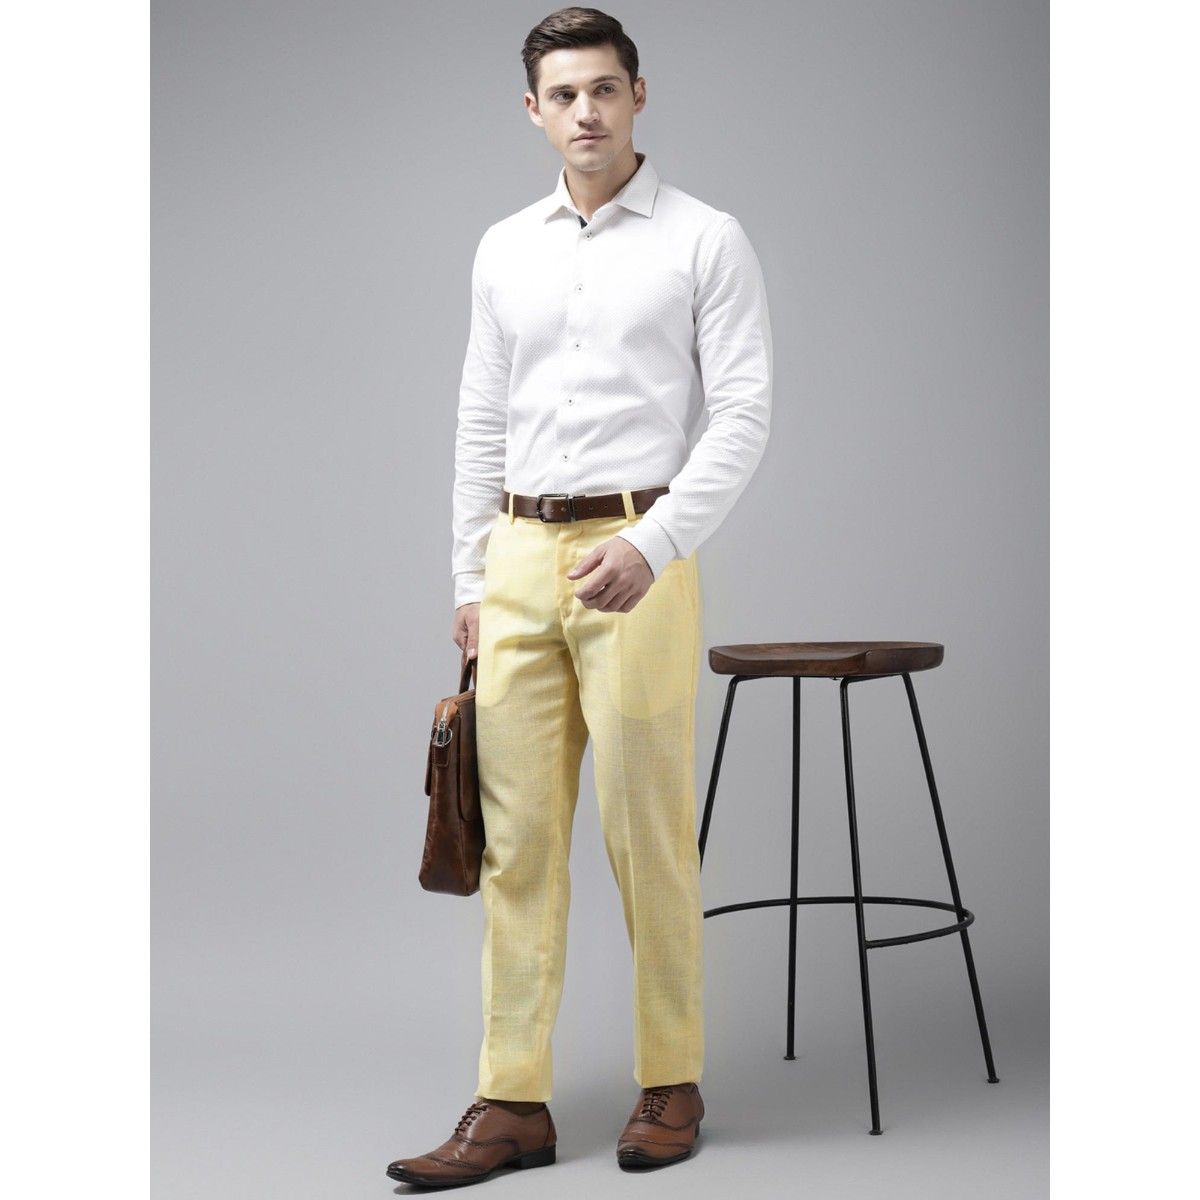 Buy Regular Fit Men Trousers Pink Poly Cotton Blend for Best Price,  Reviews, Free Shipping